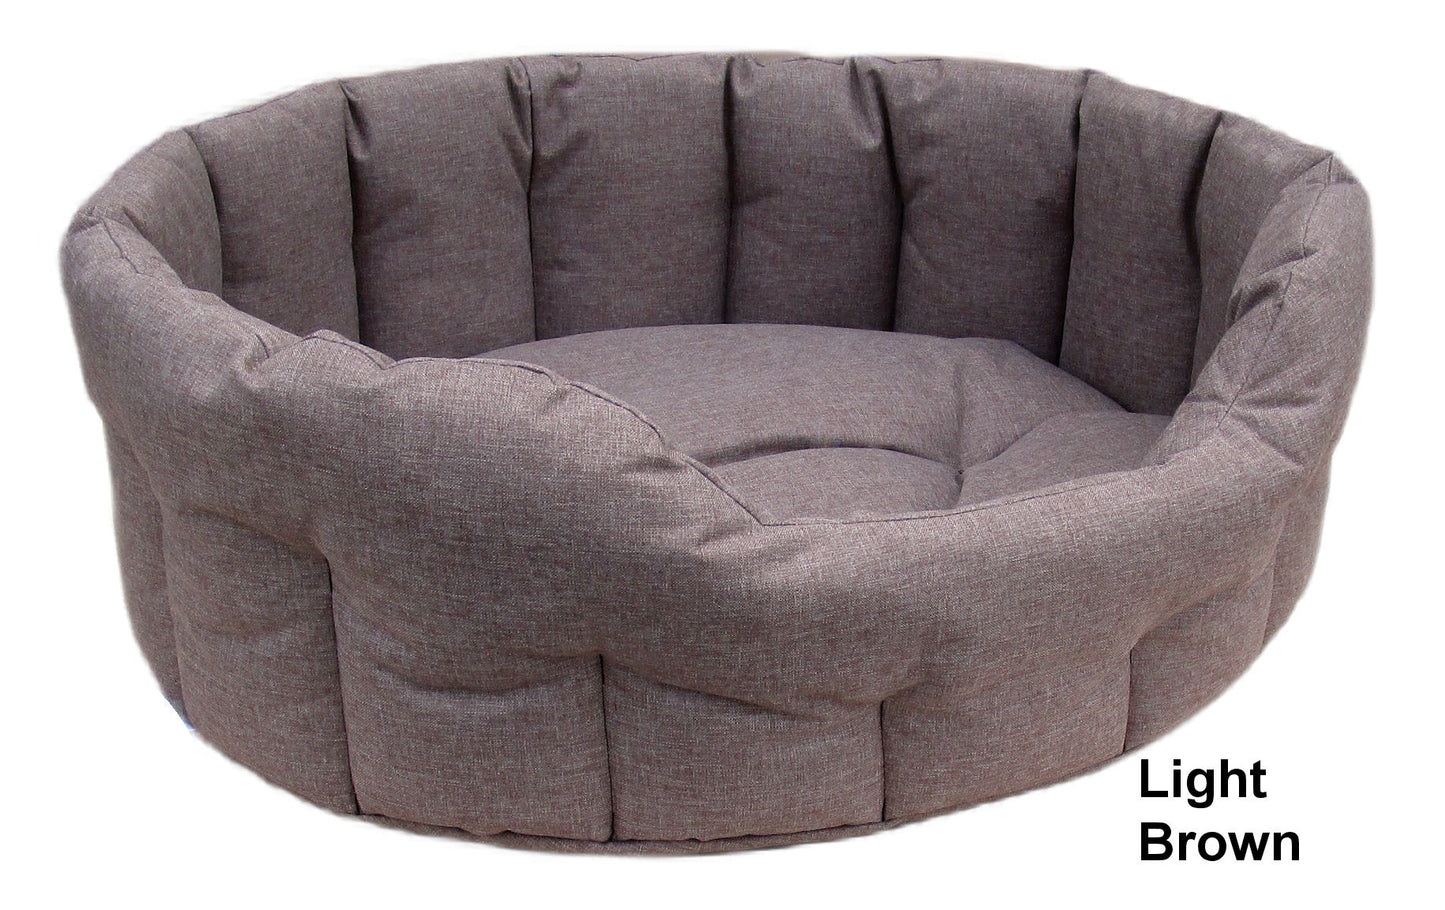 P&L Country Dog Heavy Duty Oval Drop Fronted Waterproof  Softee Dog Beds